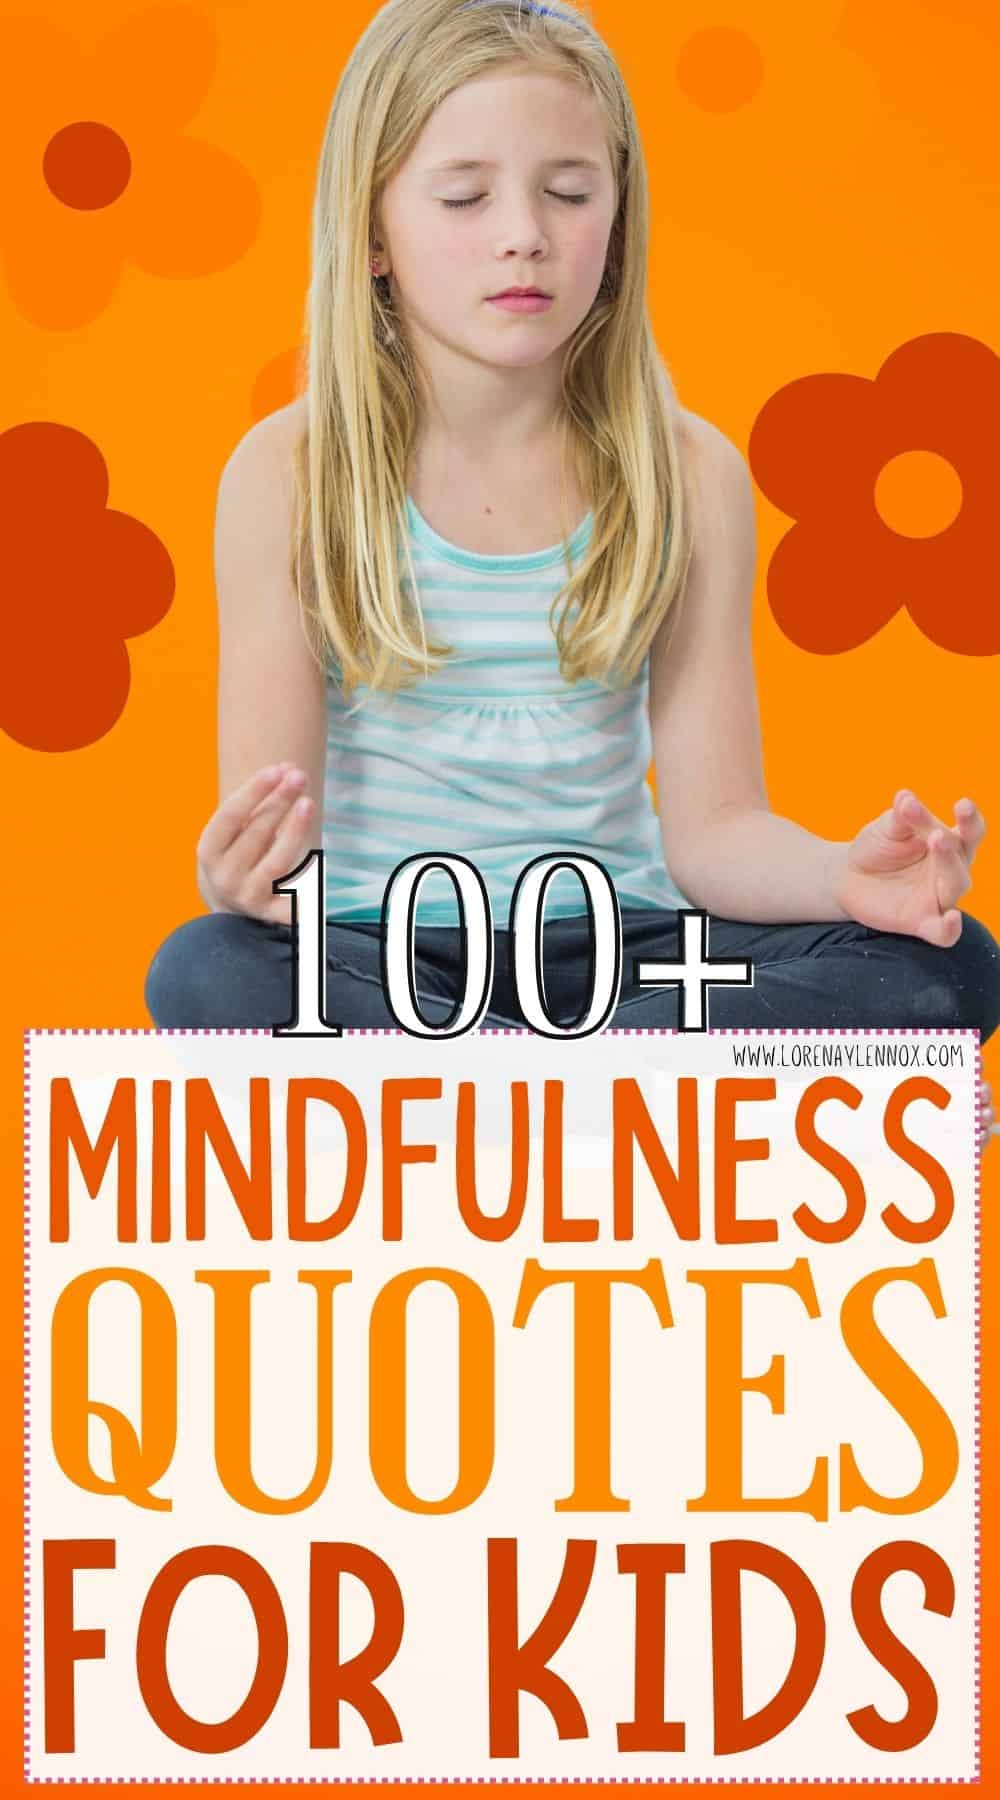 Help your children become more present in their daily lives with these 100+ mindfulness quotes for kids. Keep reading to learn a little bit more about mindfulness, and how you can add these mindfulness quotes for kids into your daily life to encourage mindfulness in your children, and in yourself, too.